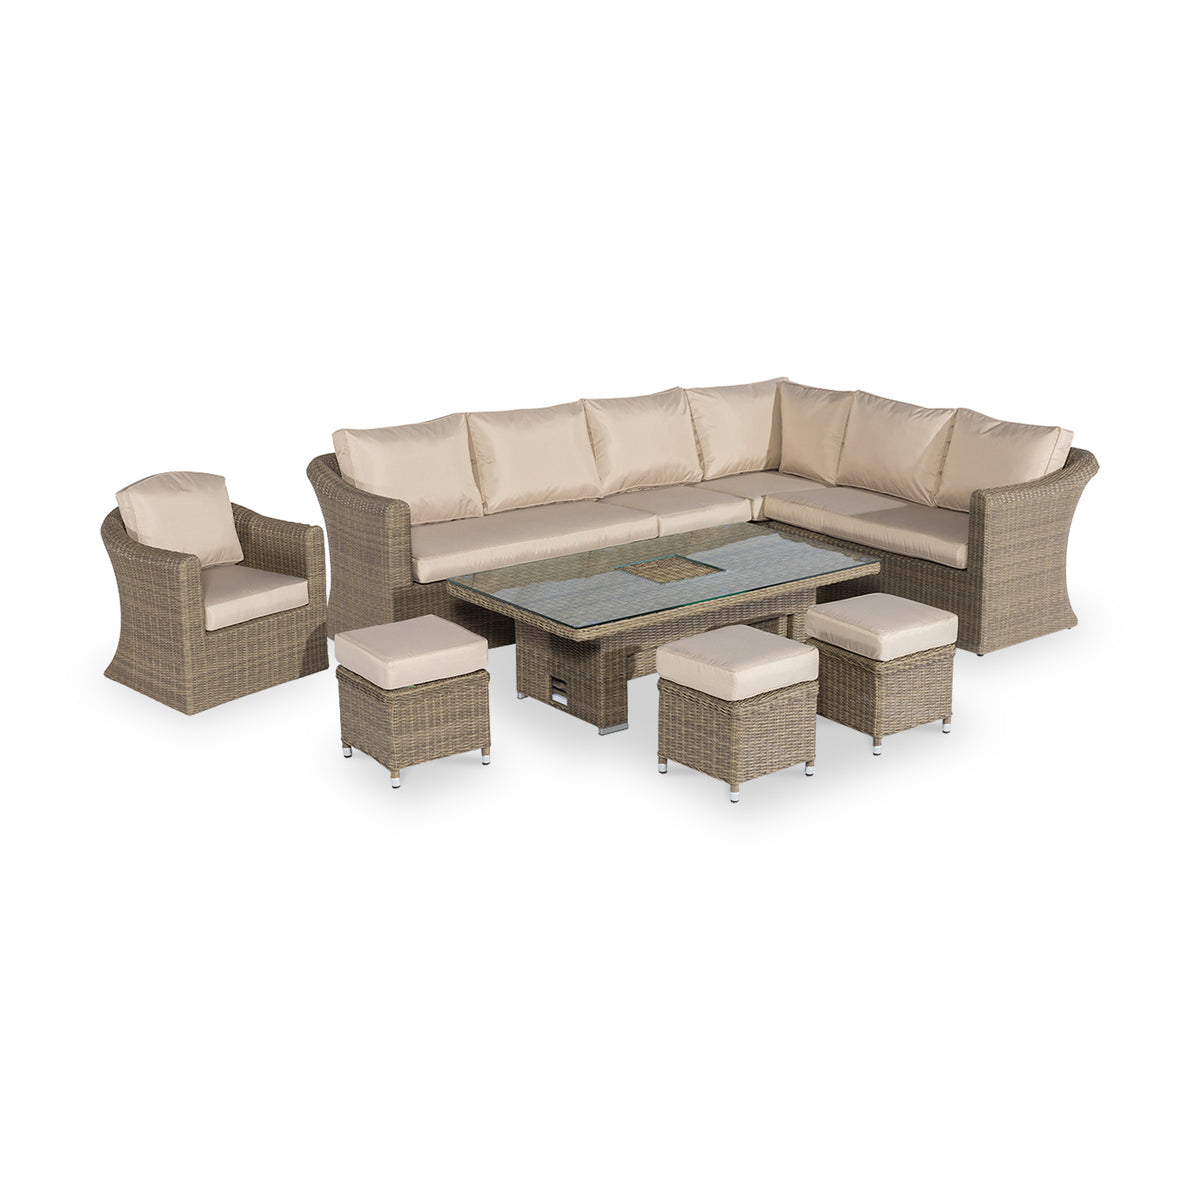 Maze Winchester Deluxe Outdoor Corner Dining Set with Rising Table & Chairs